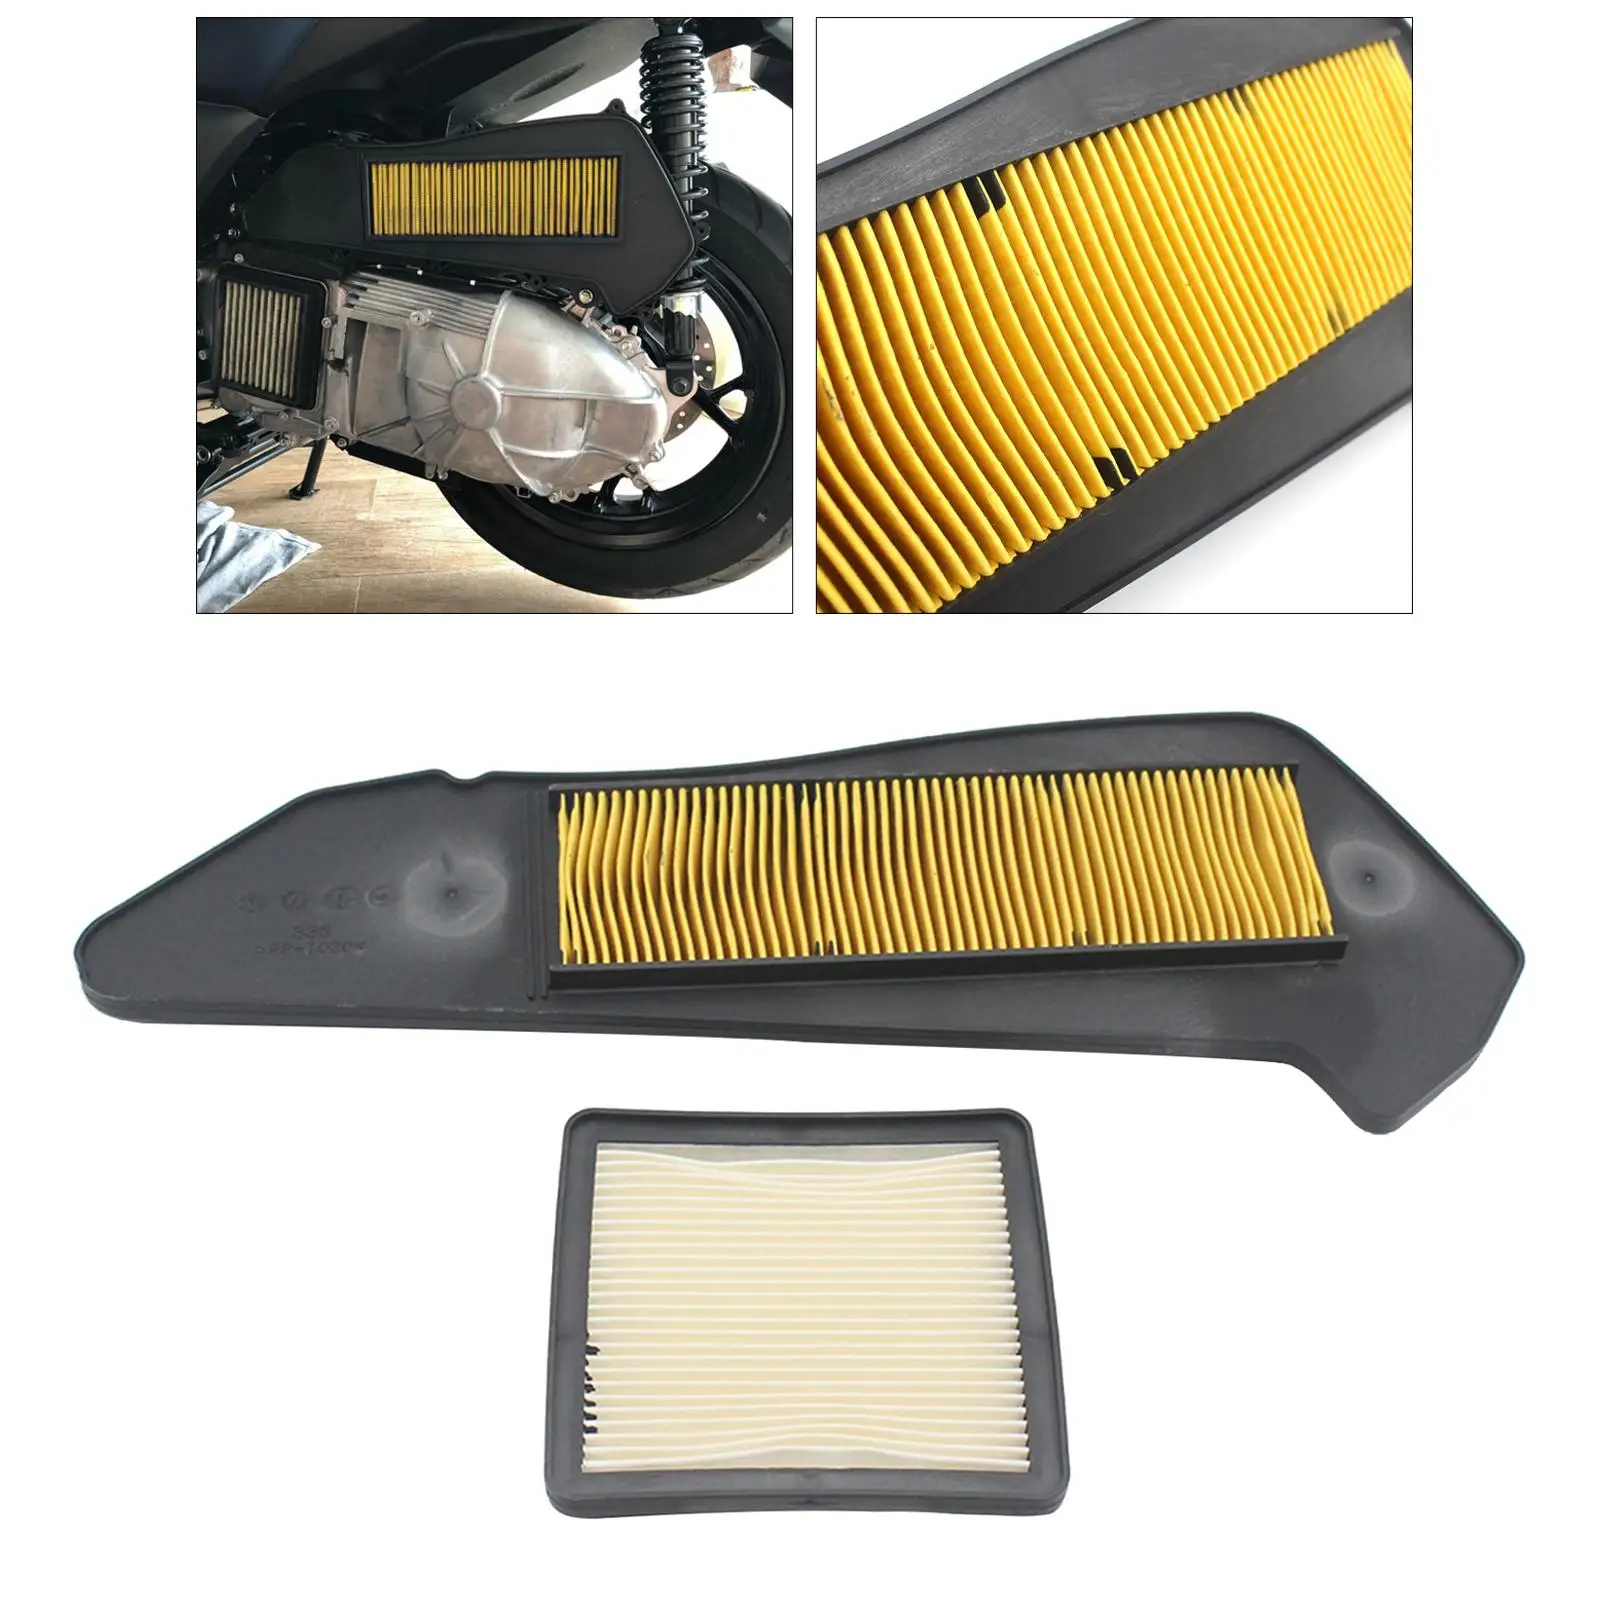 2Pieces Motorbike Air Intake Cleaner for 250 300,